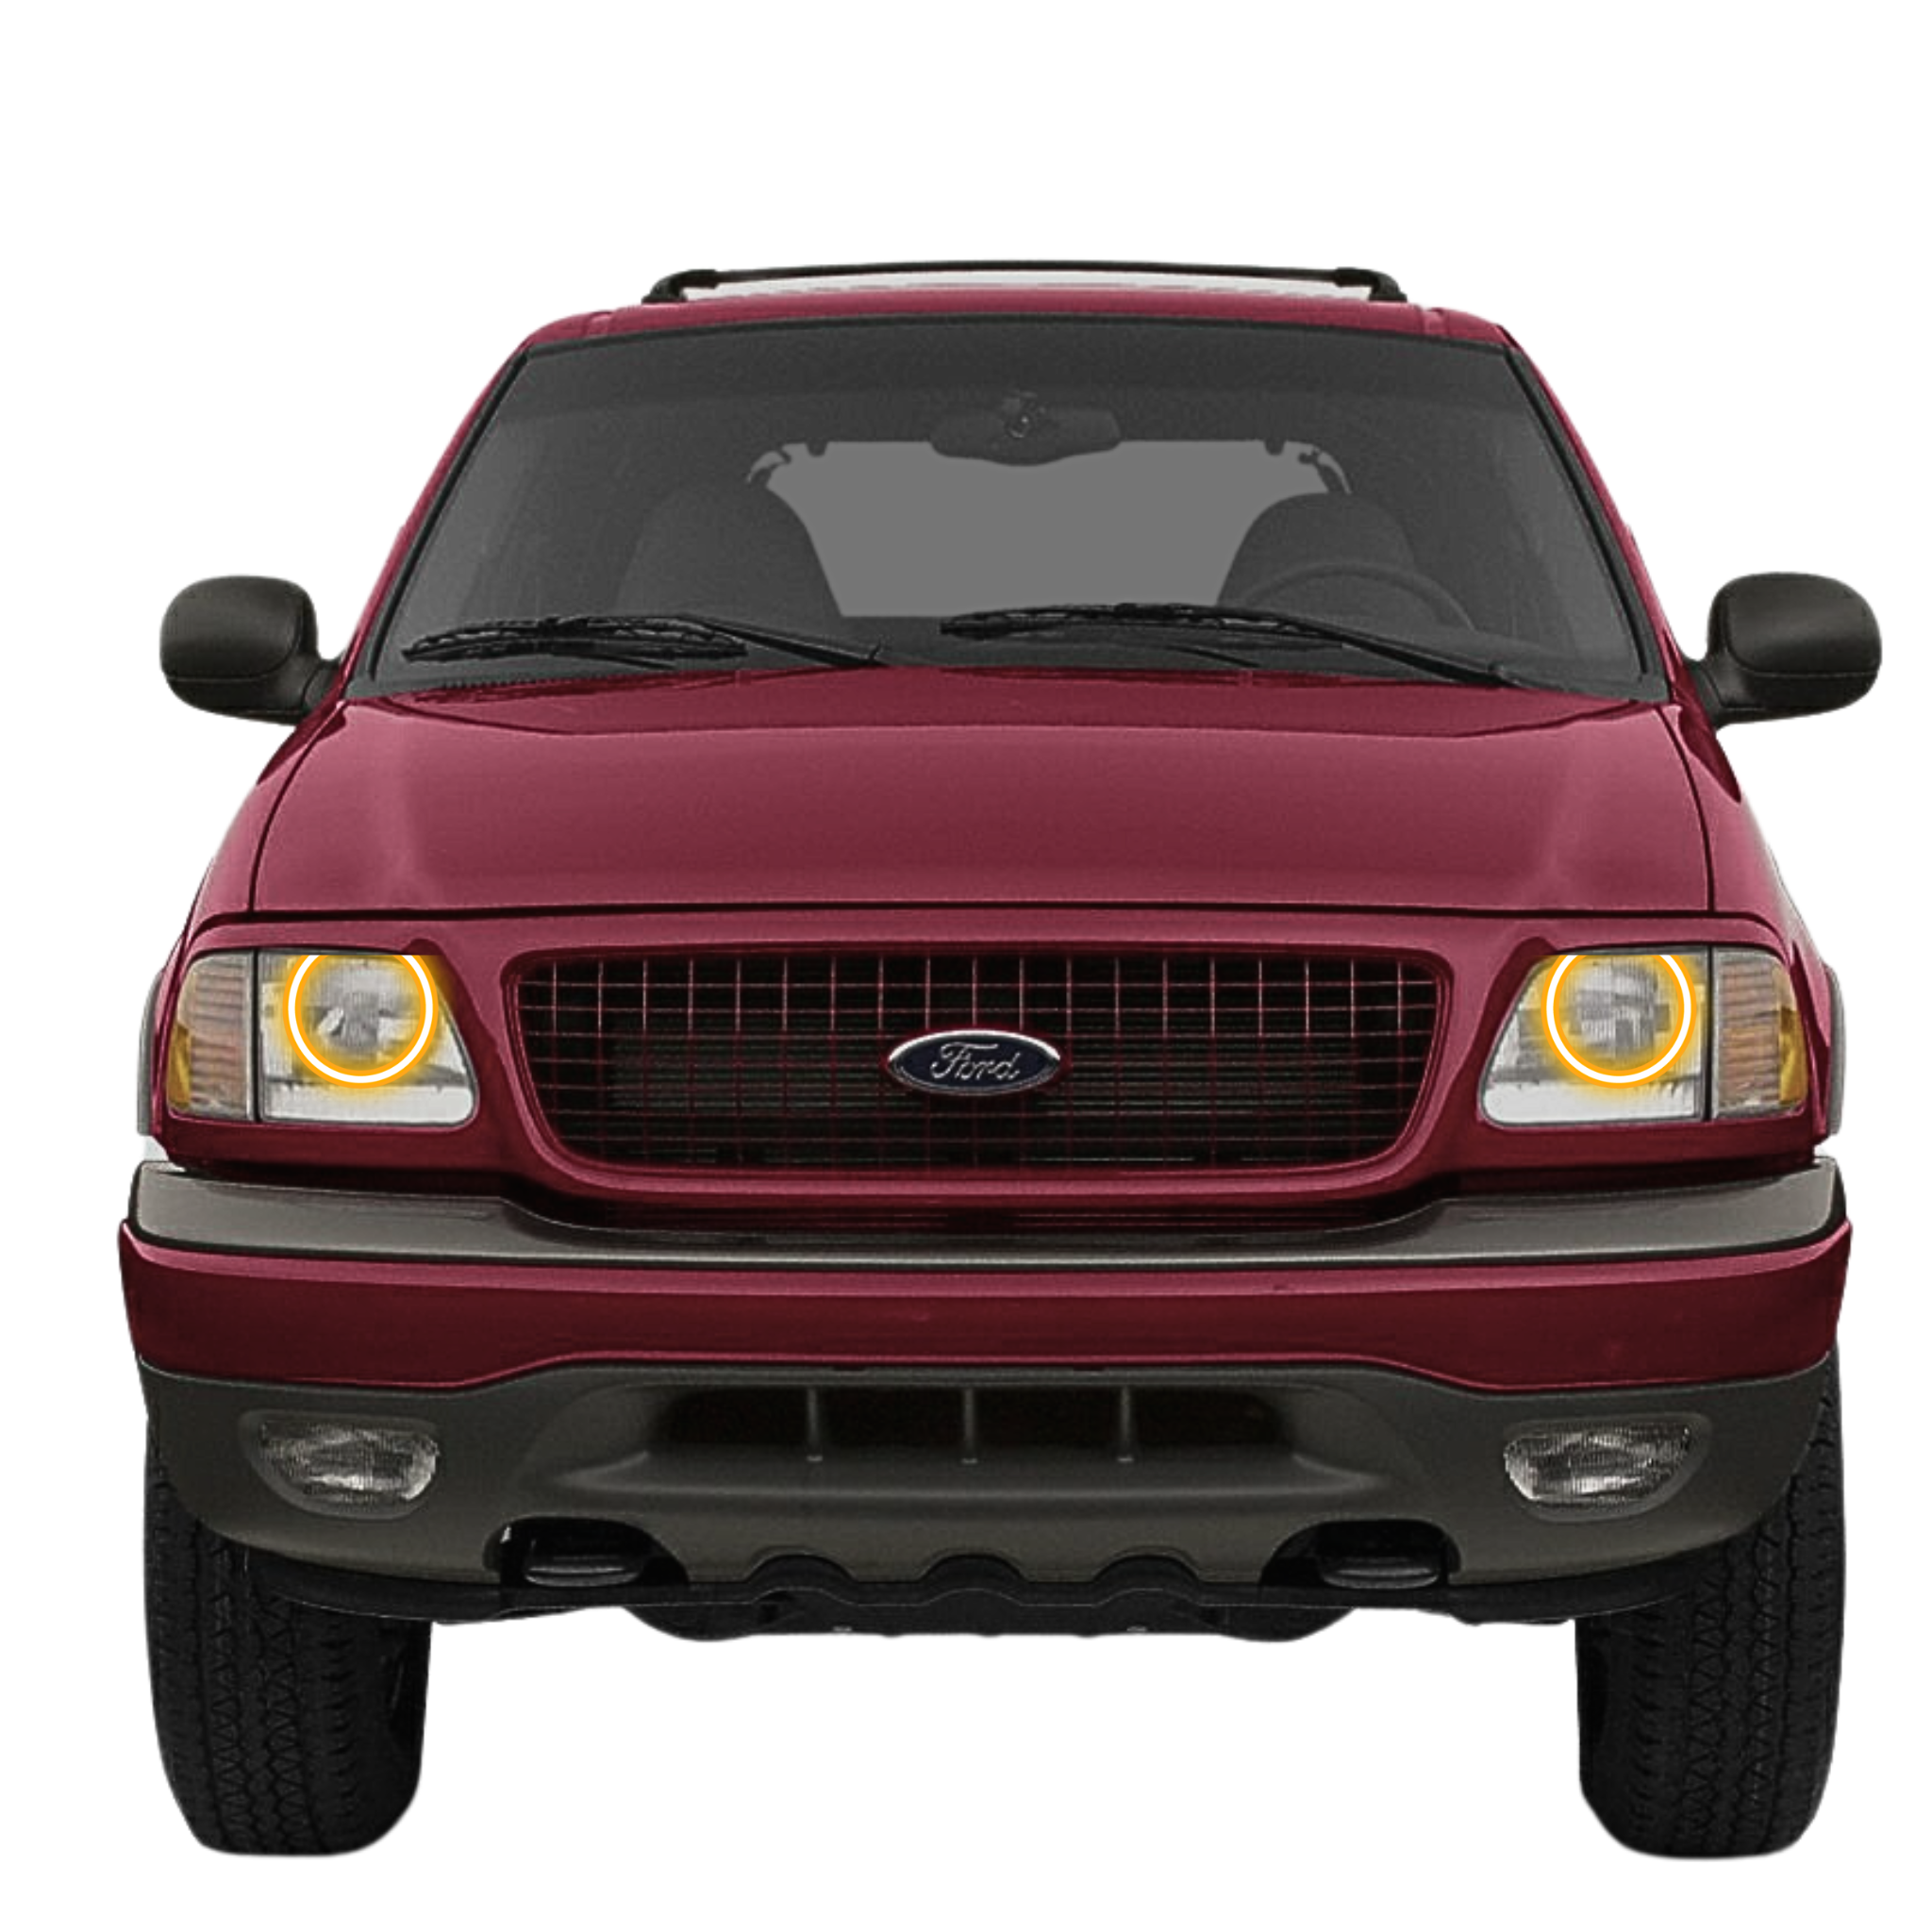 1997-2002 Ford Expedition Multicolor Halo Kit - RGB Halo Kits Multicolor Flow Series Color Chasing RGBWA LED headlight kit Colorshift Oracle Lighting Trendz OneUpLighting Morimoto theretrofitsource AutoLEDTech Diode Dynamics